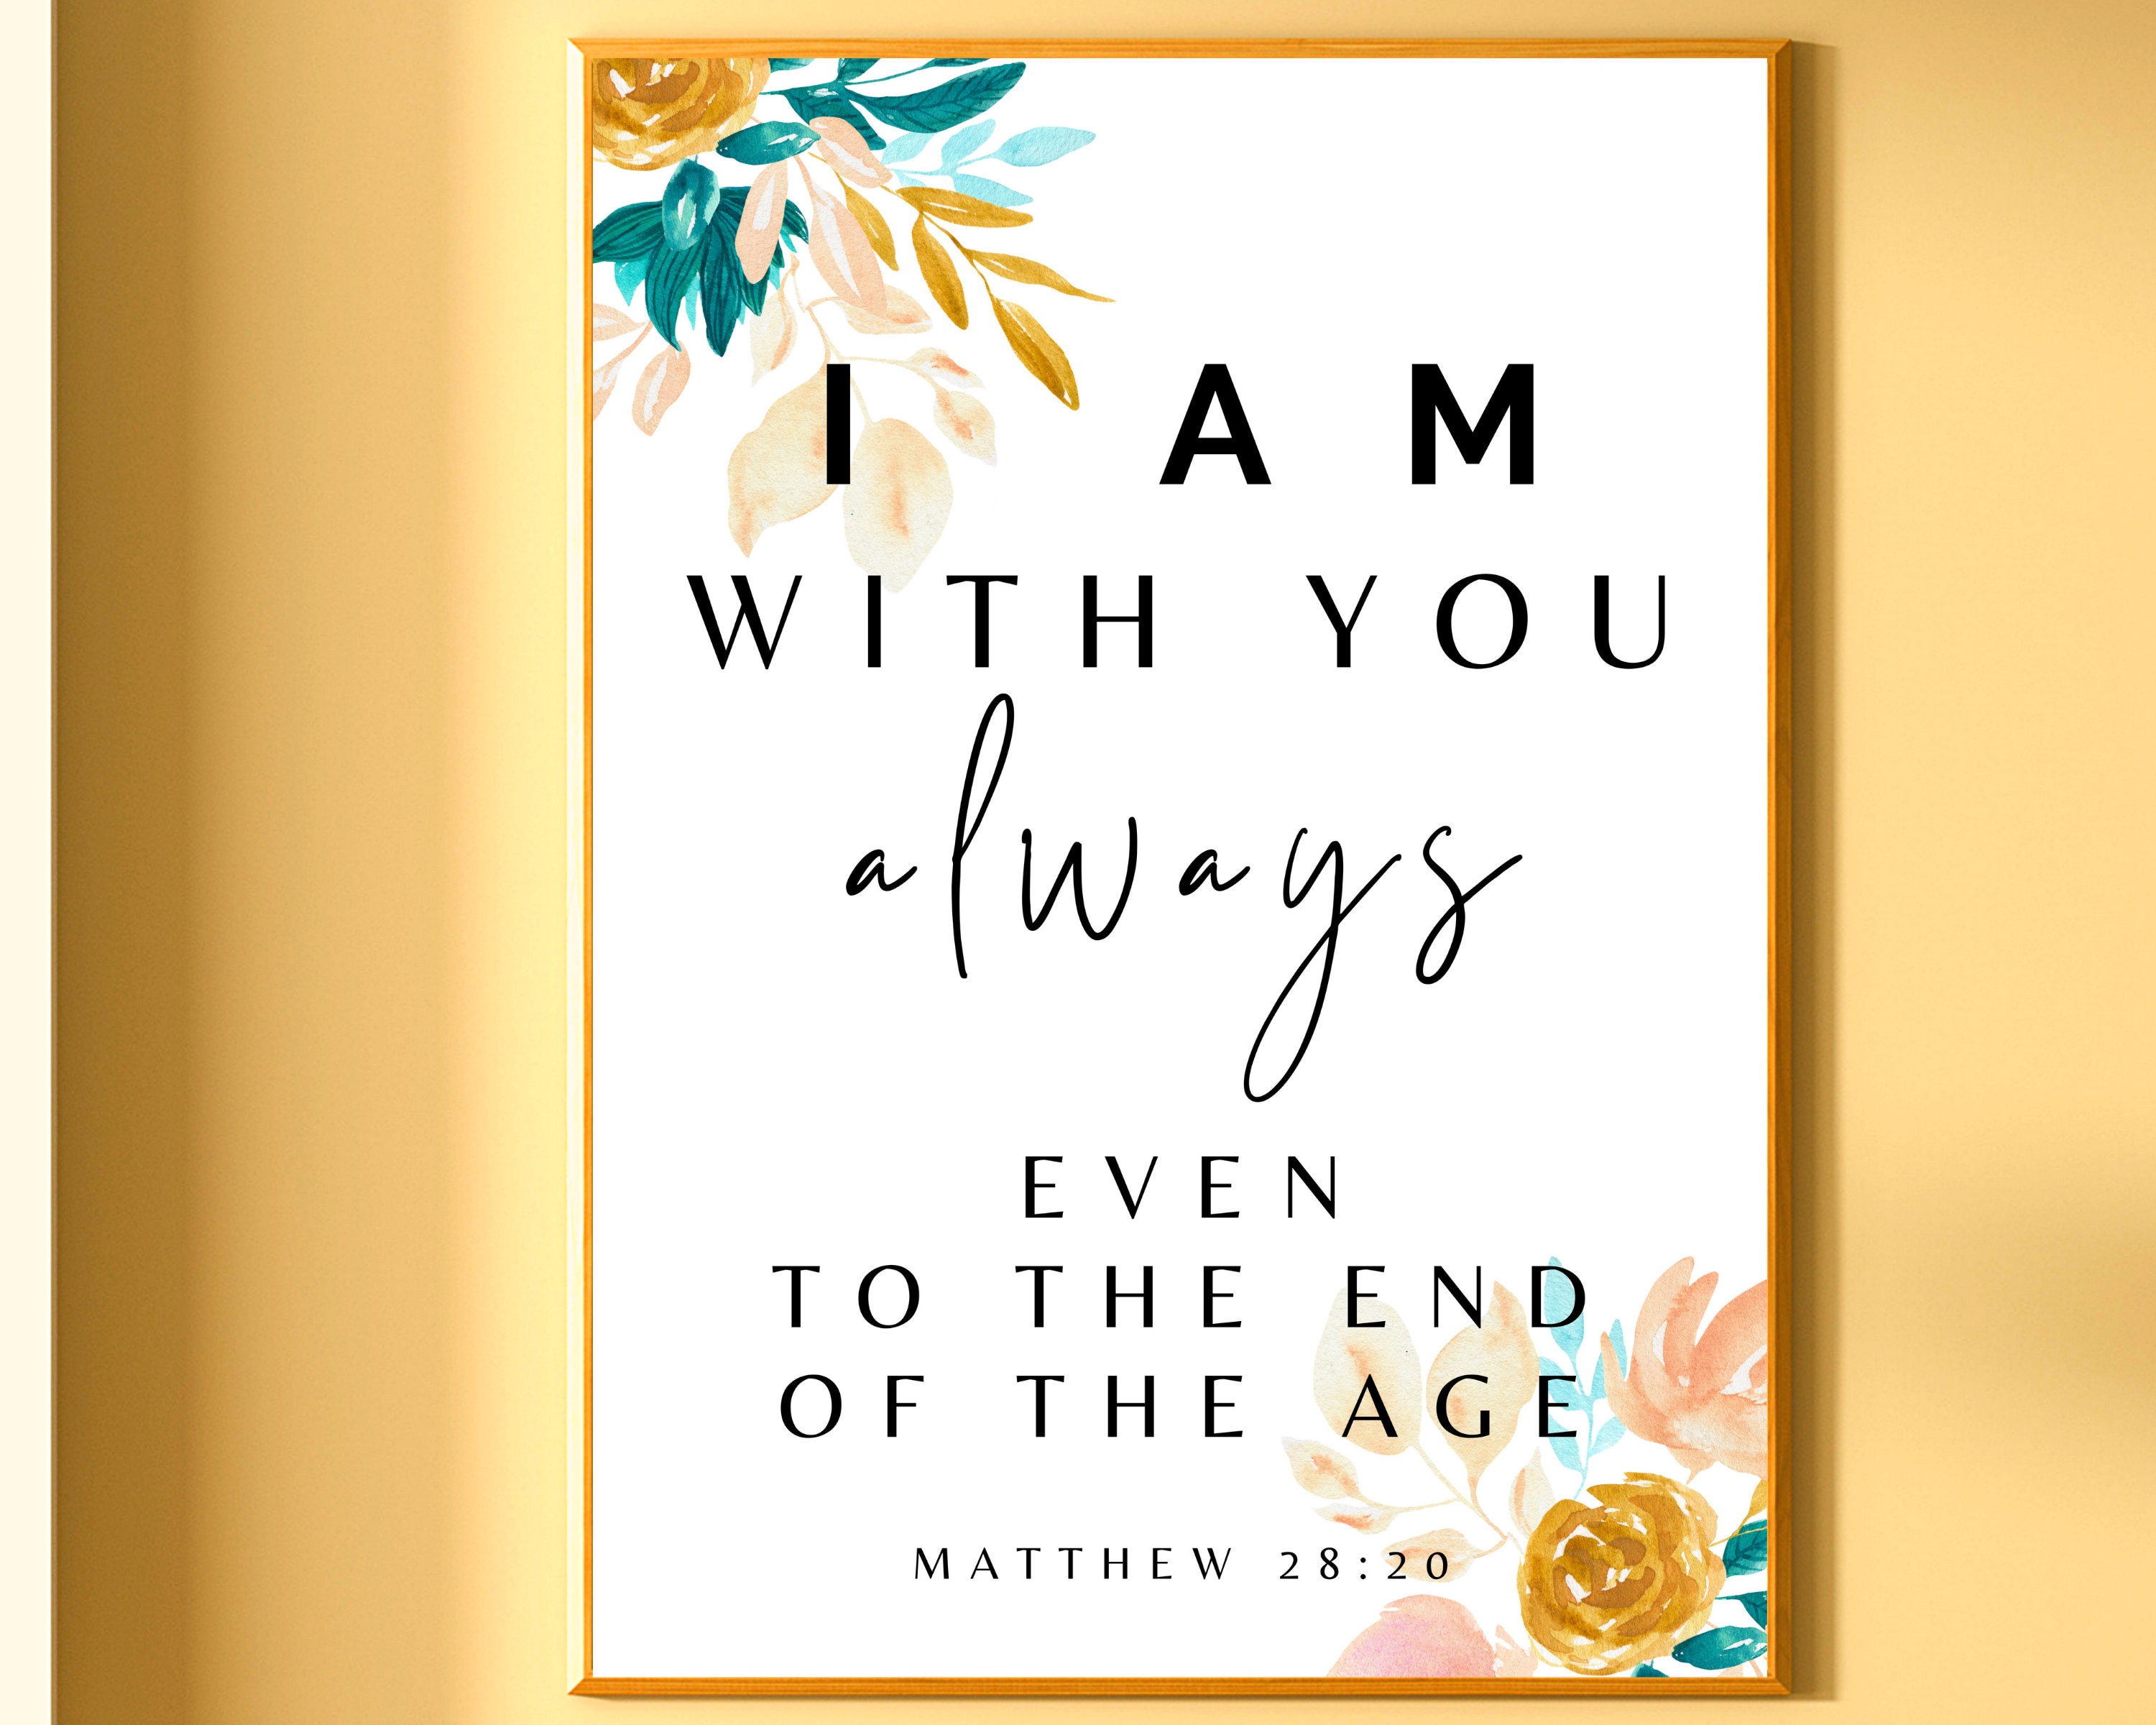 I Am With You Always Hand Cut Wood Wall Hanging To The End Of The Age 